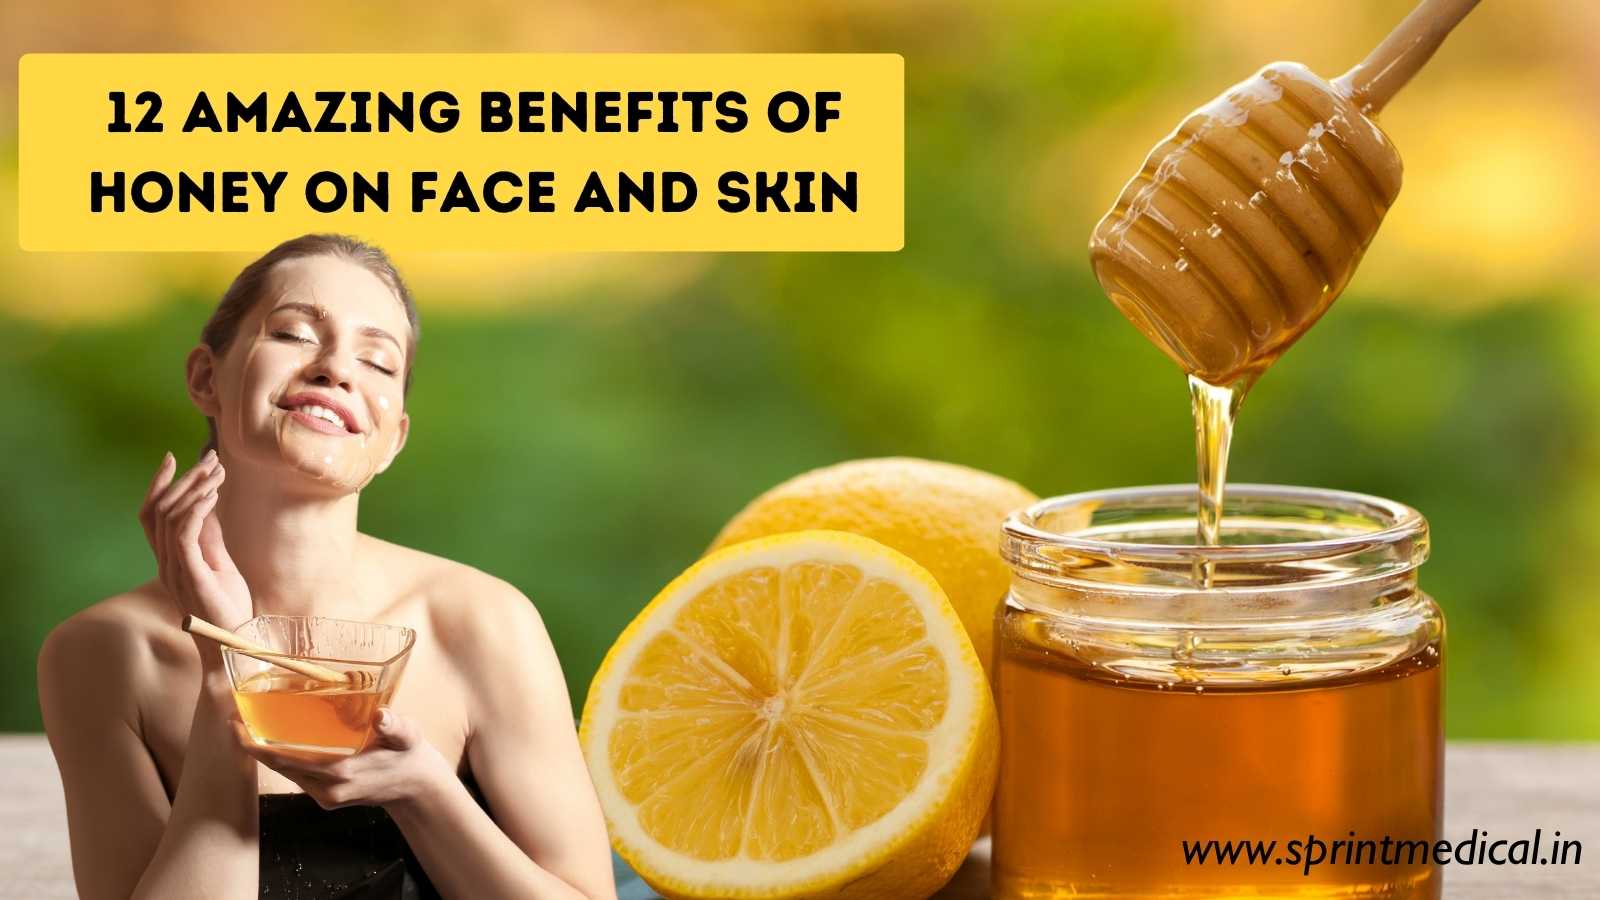 12-amazing-benefits-of-honey-on-face-and-skin-sprint-medical